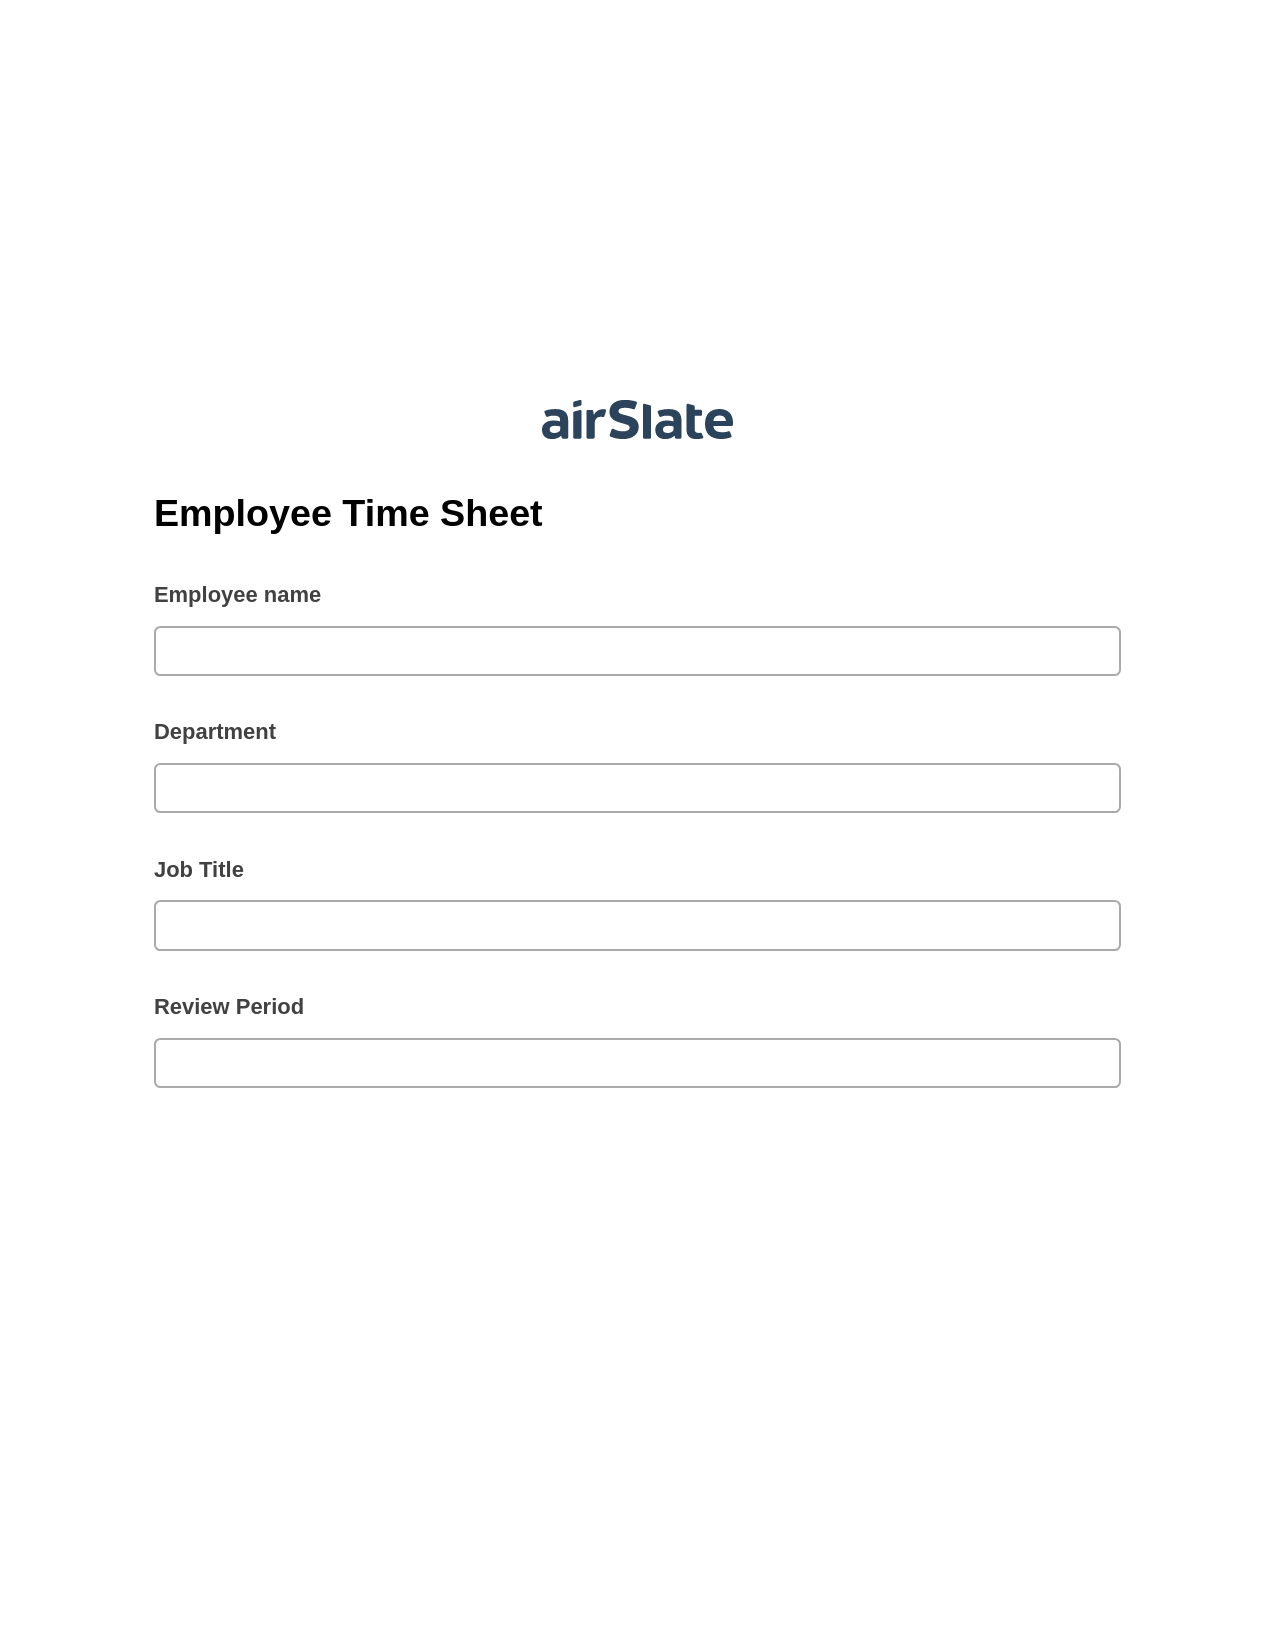 Employee Time Sheet Pre-fill from MS Dynamics 365 Records, Export to MS Dynamics 365 Bot, Slack Notification Postfinish Bot